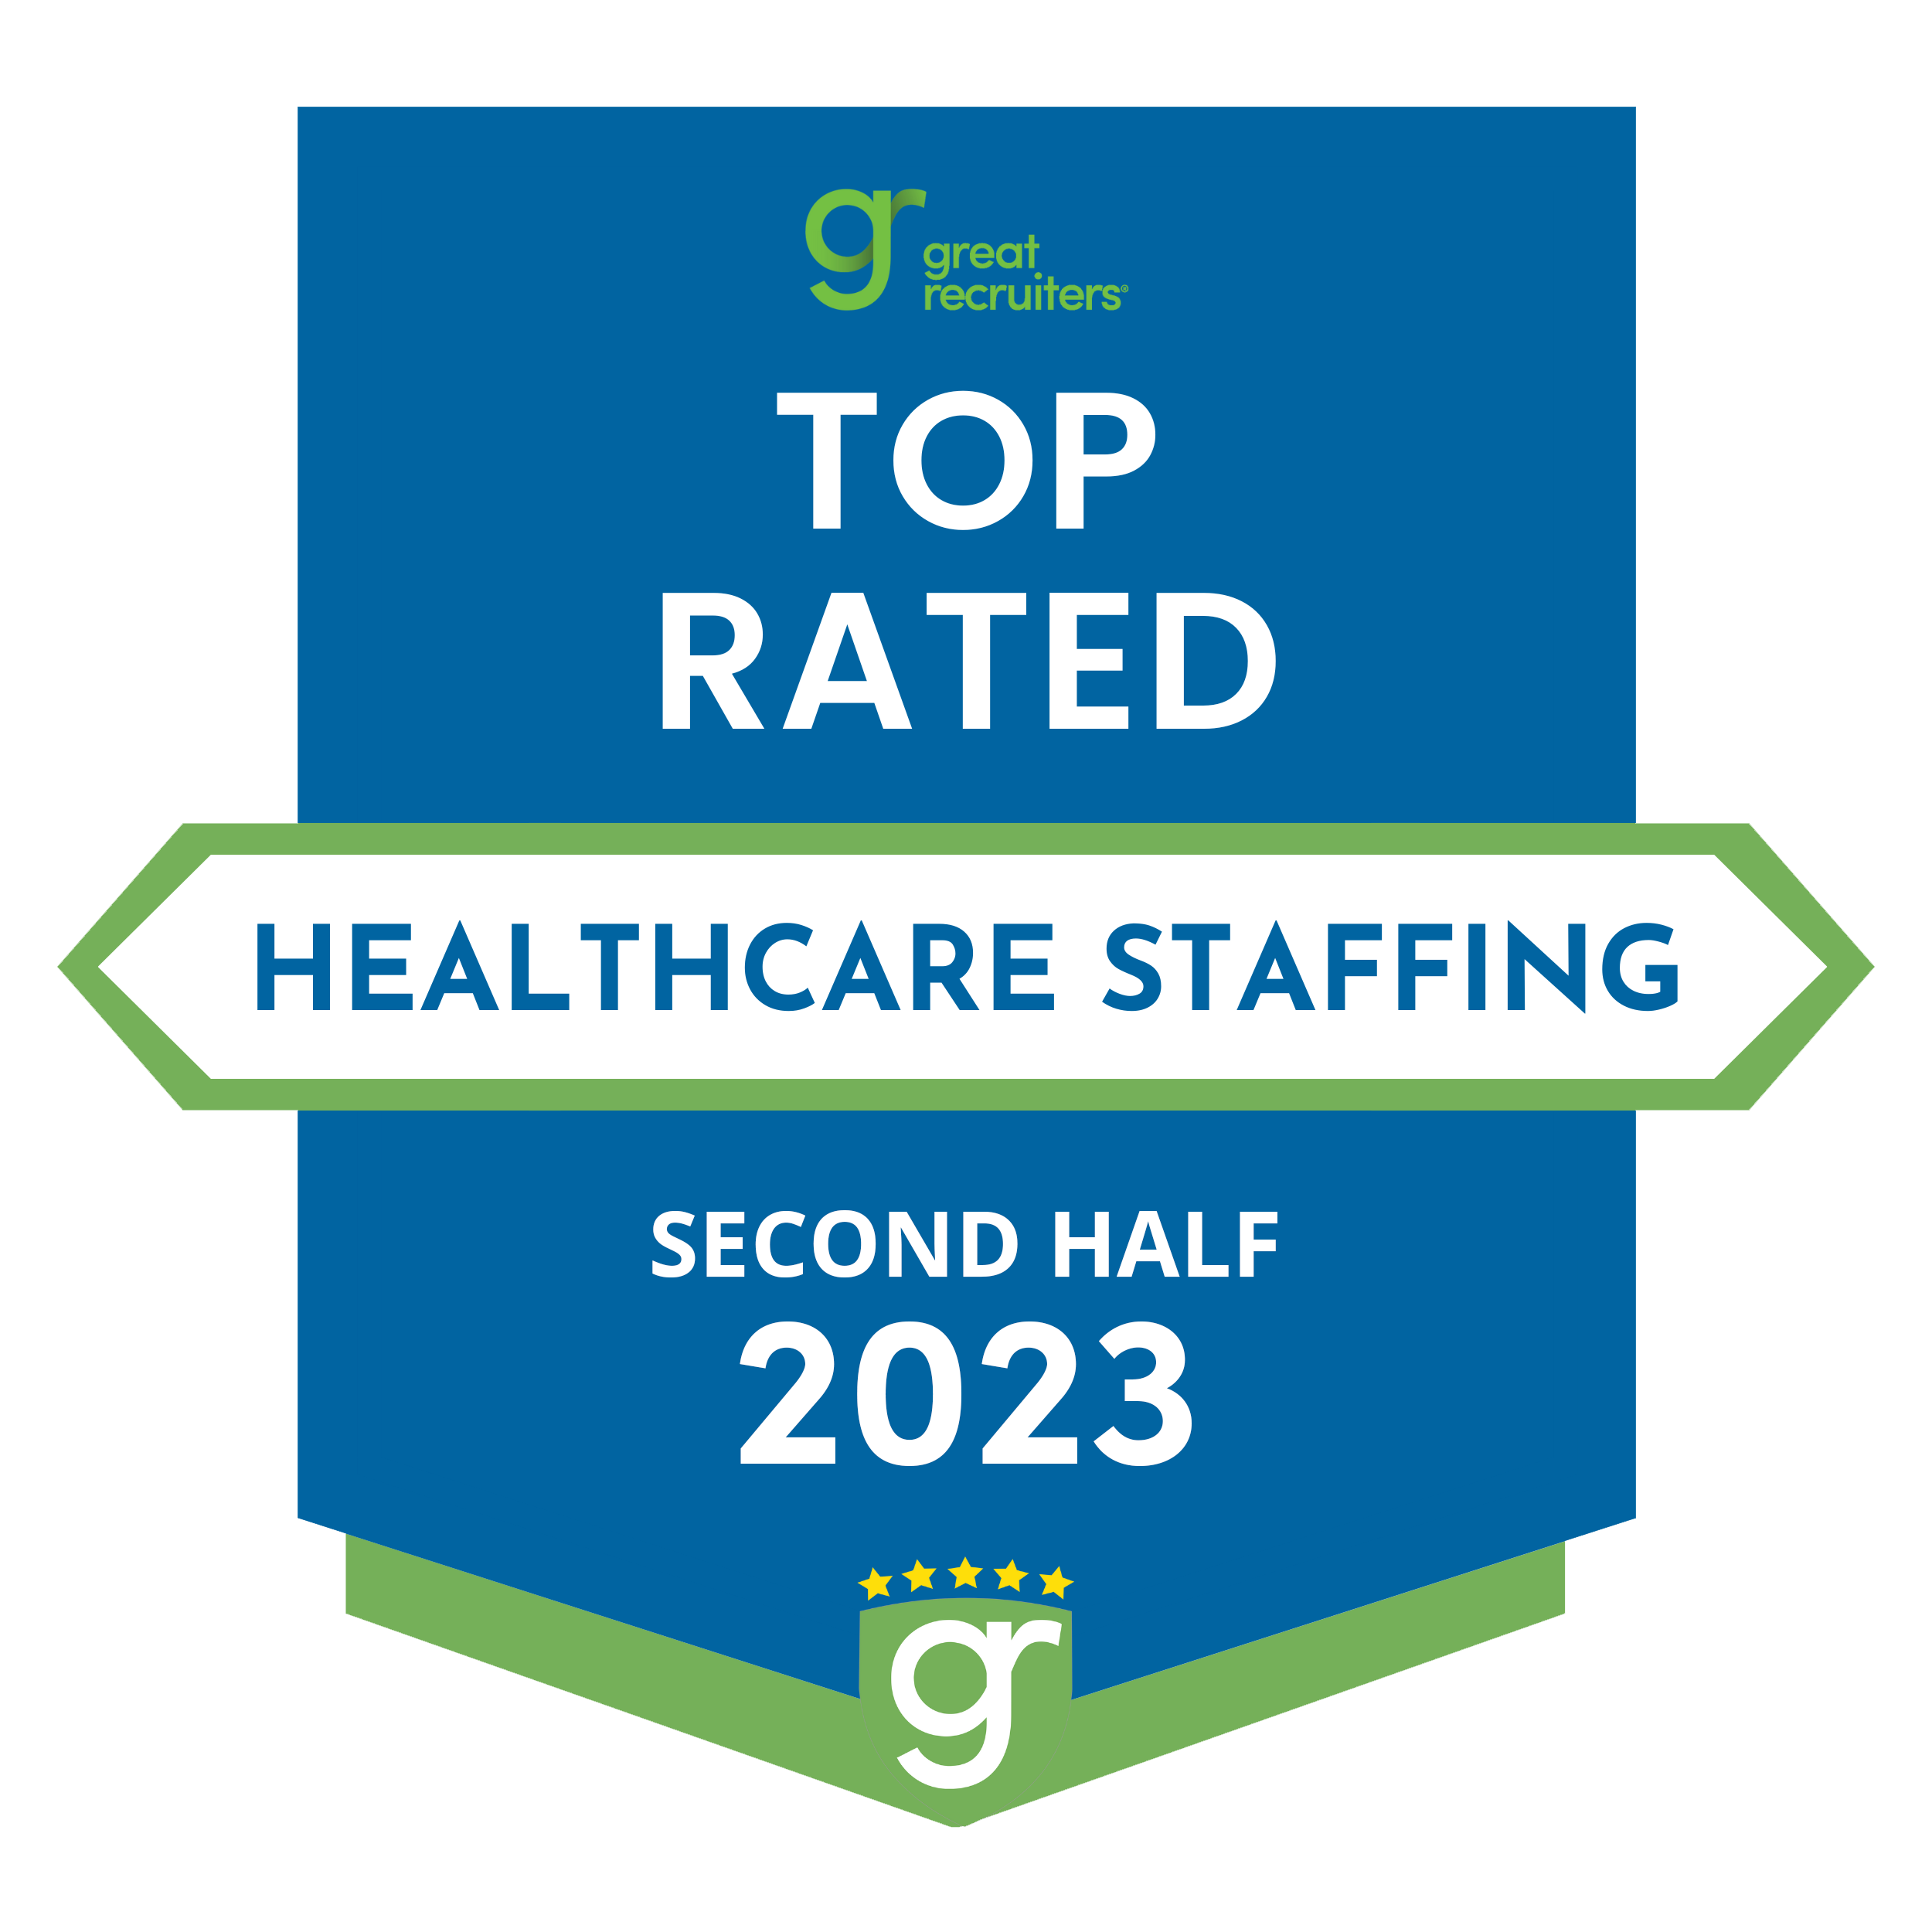 Health Care Staffing Image>